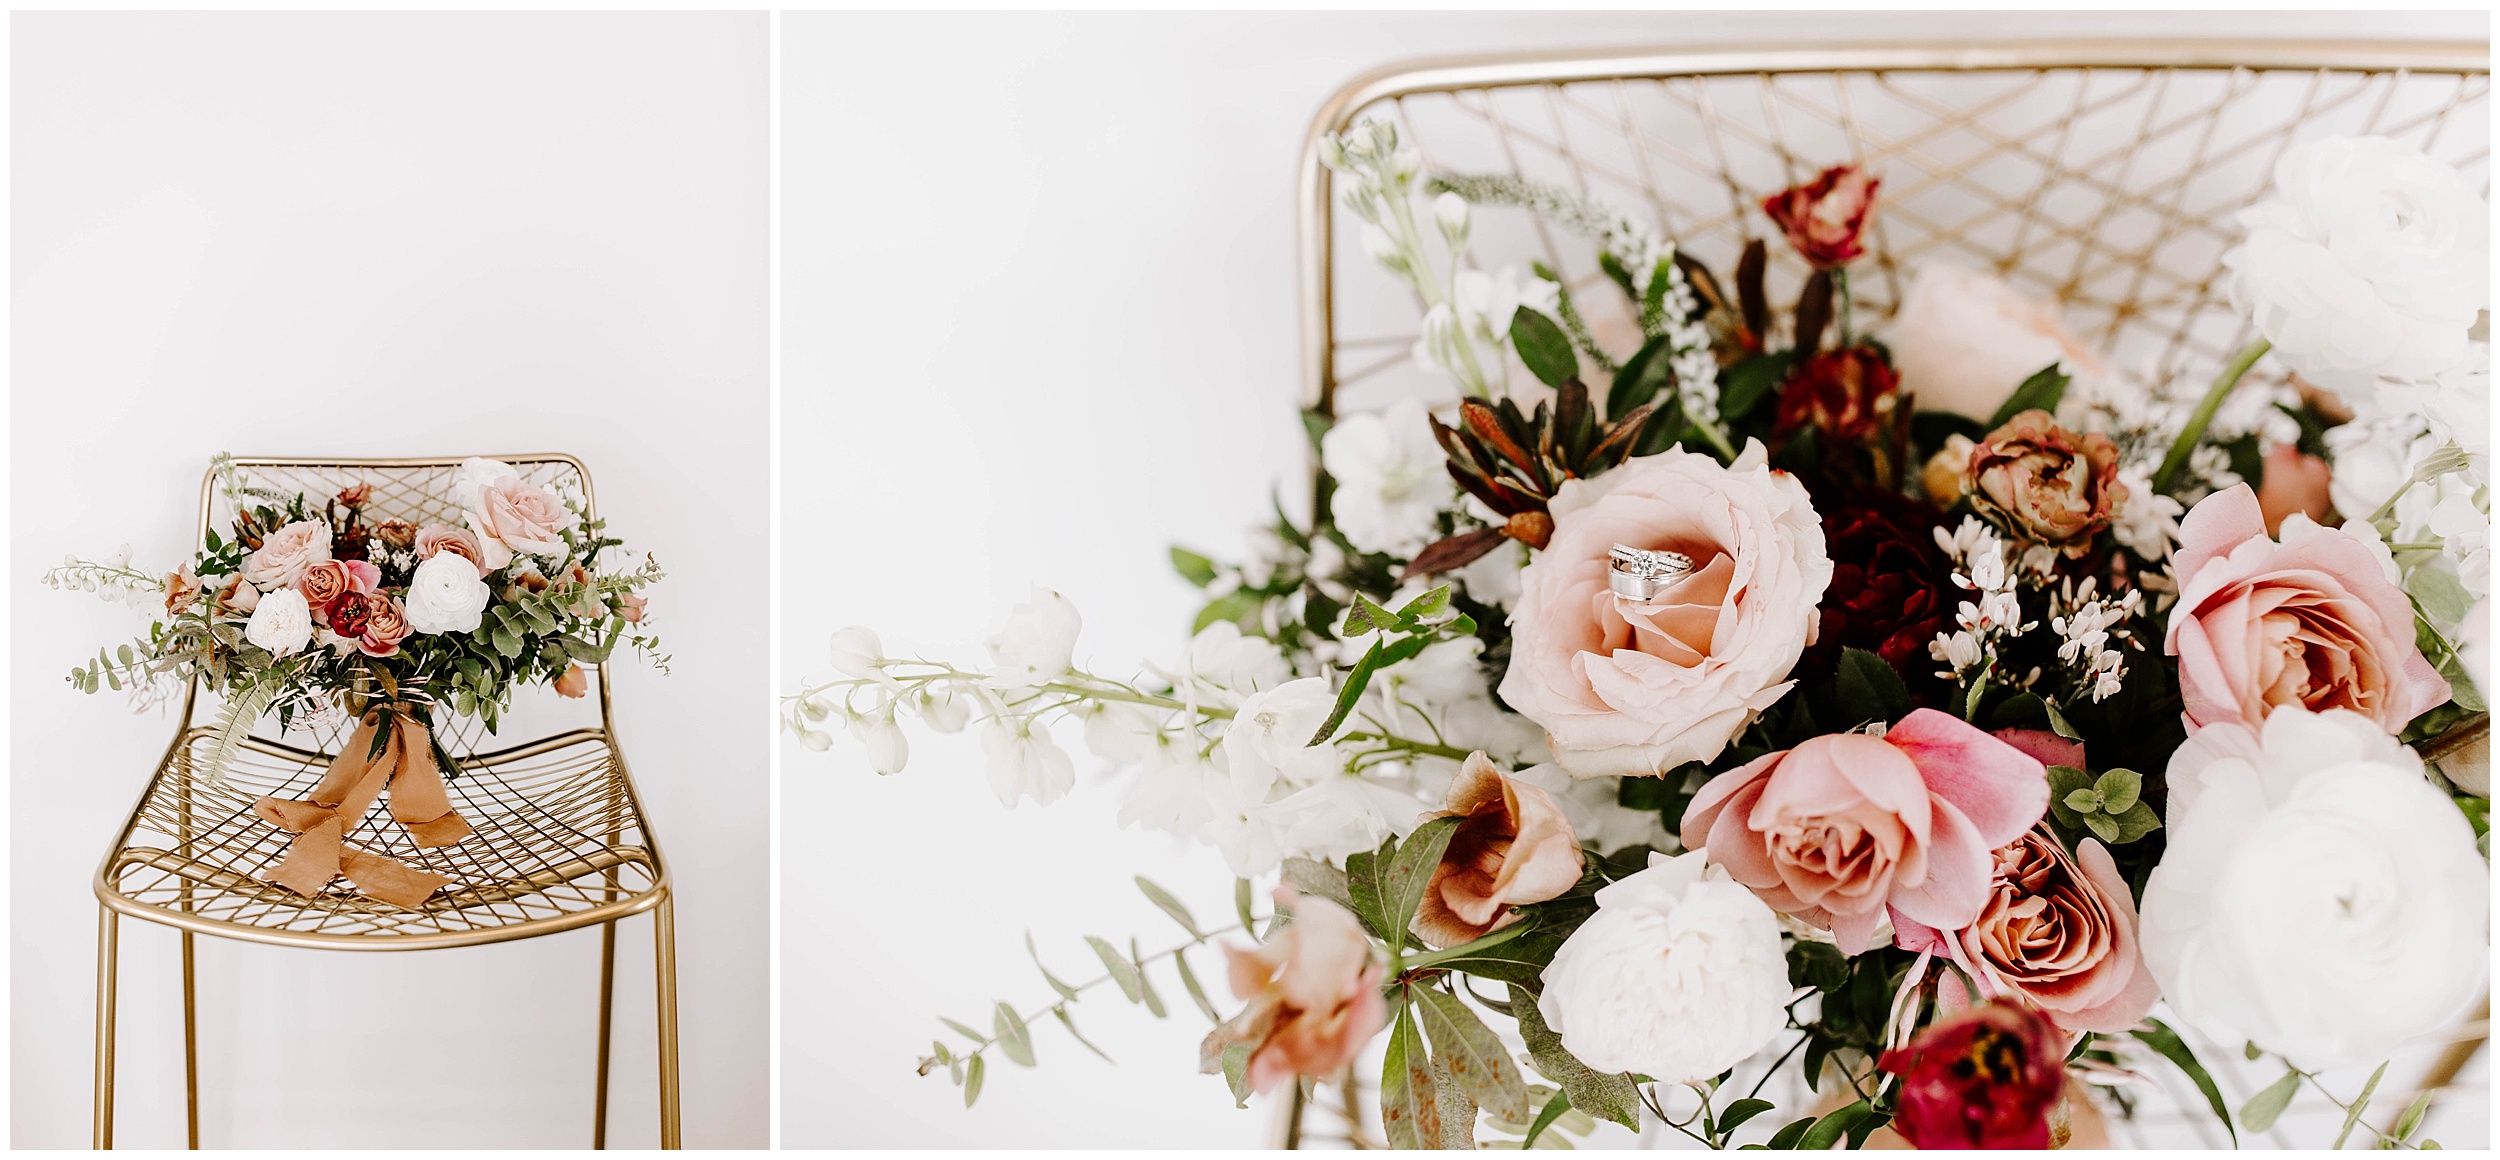 wedding day florals, madeline isabella photography